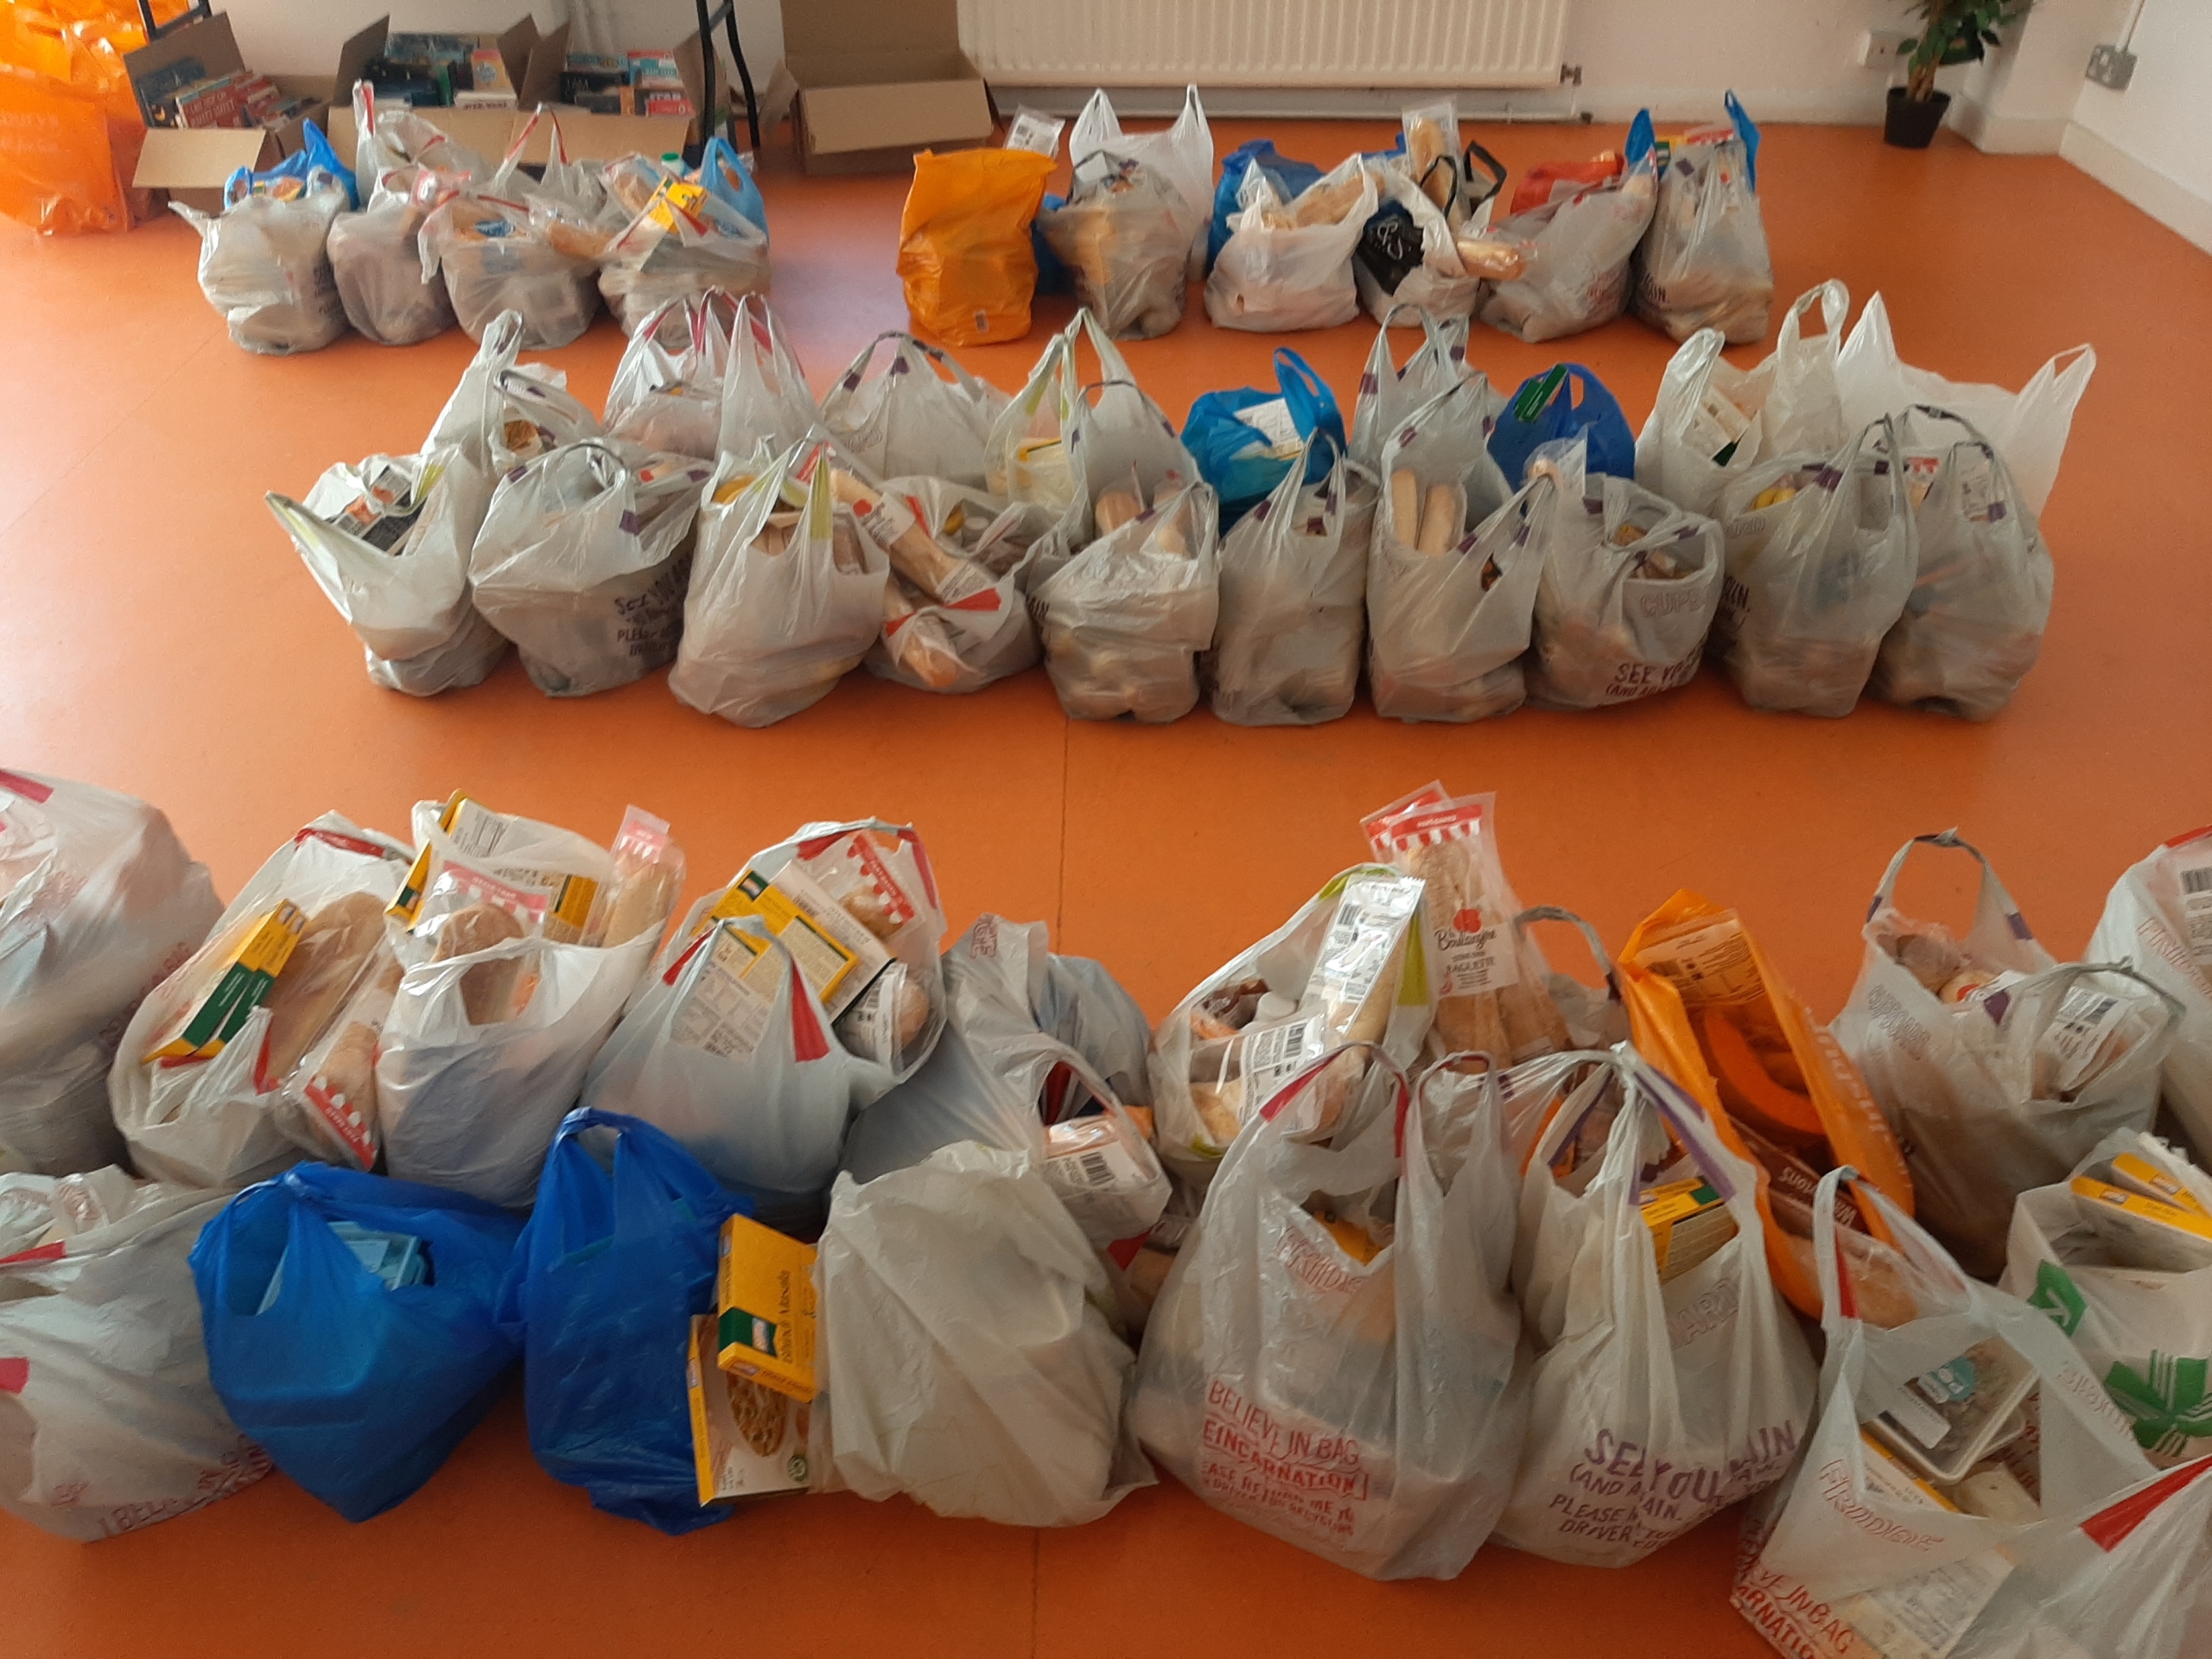 The image shows bags of food distributed through Granville Community Kitchen's Food Aid Programme